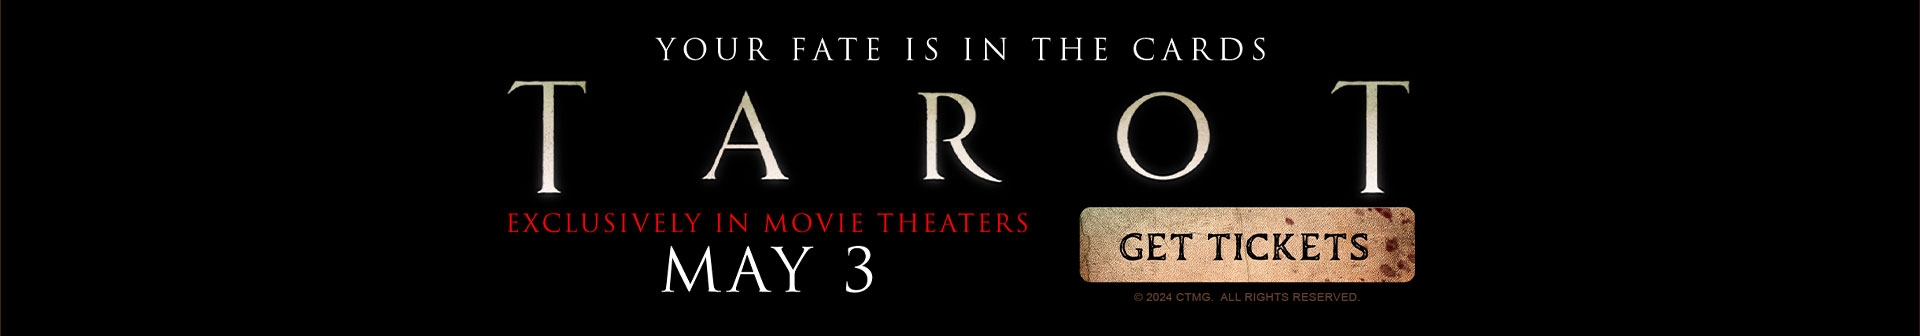 Tarot, exclusively in movie theatres May 03. Get tickets